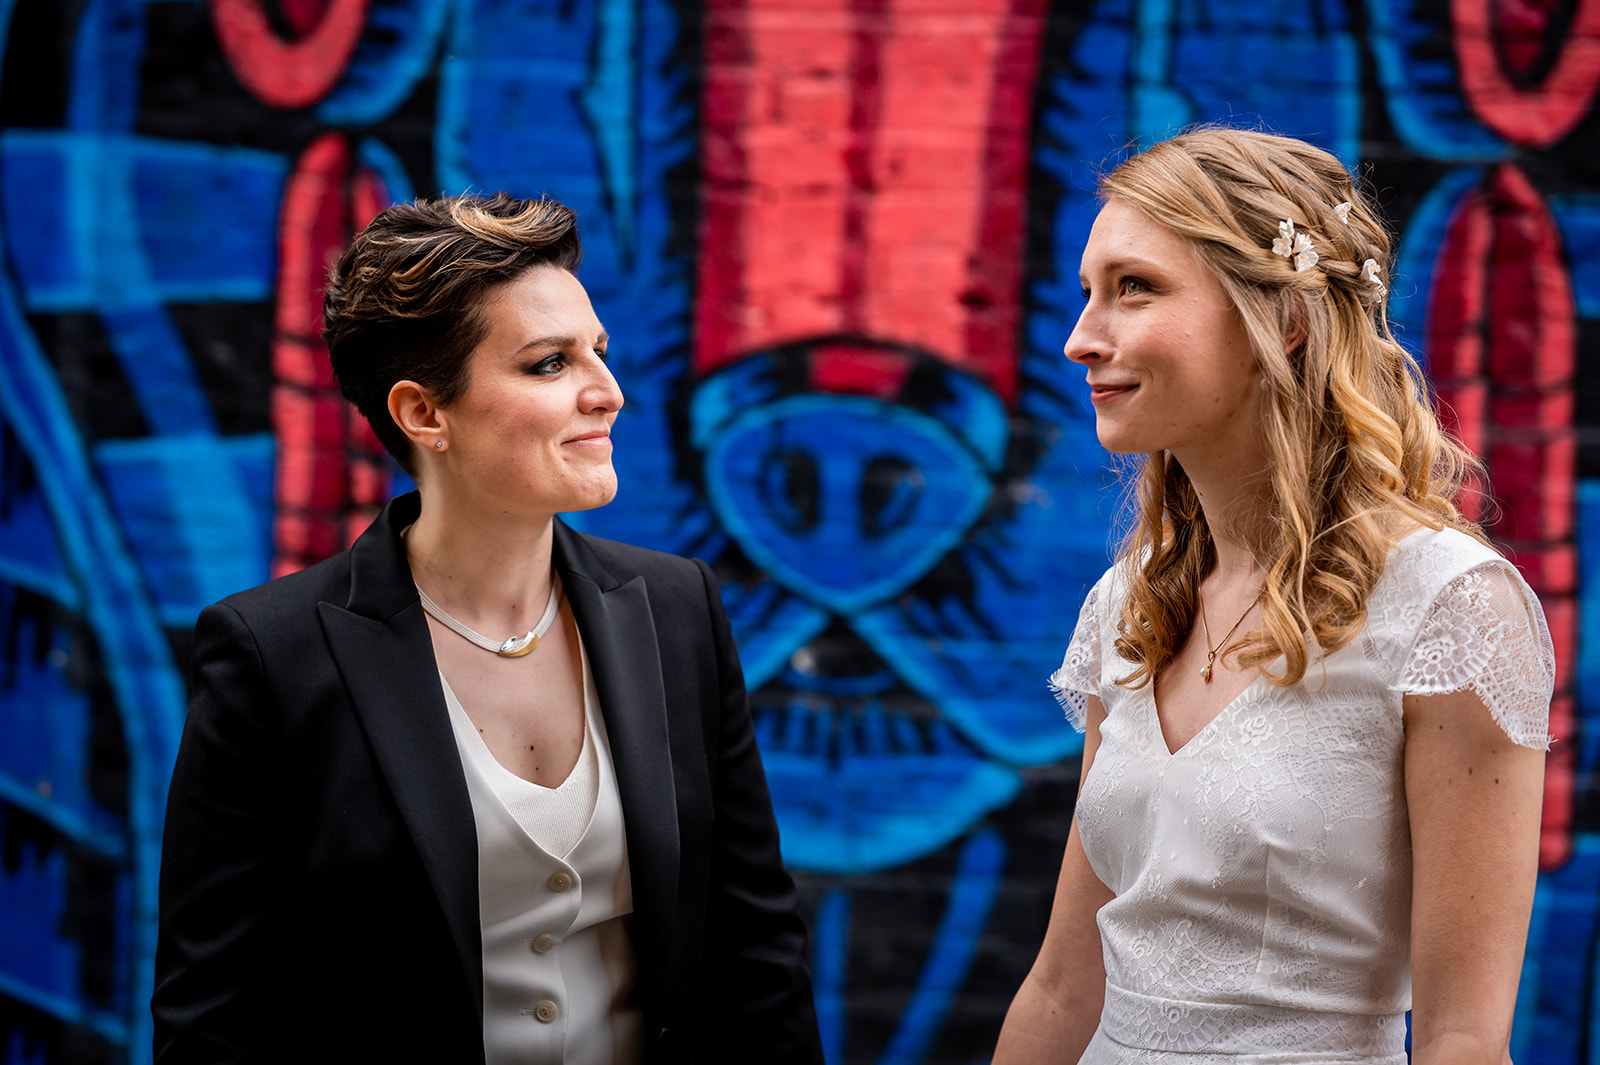 two brides standing in front of vibrant street art